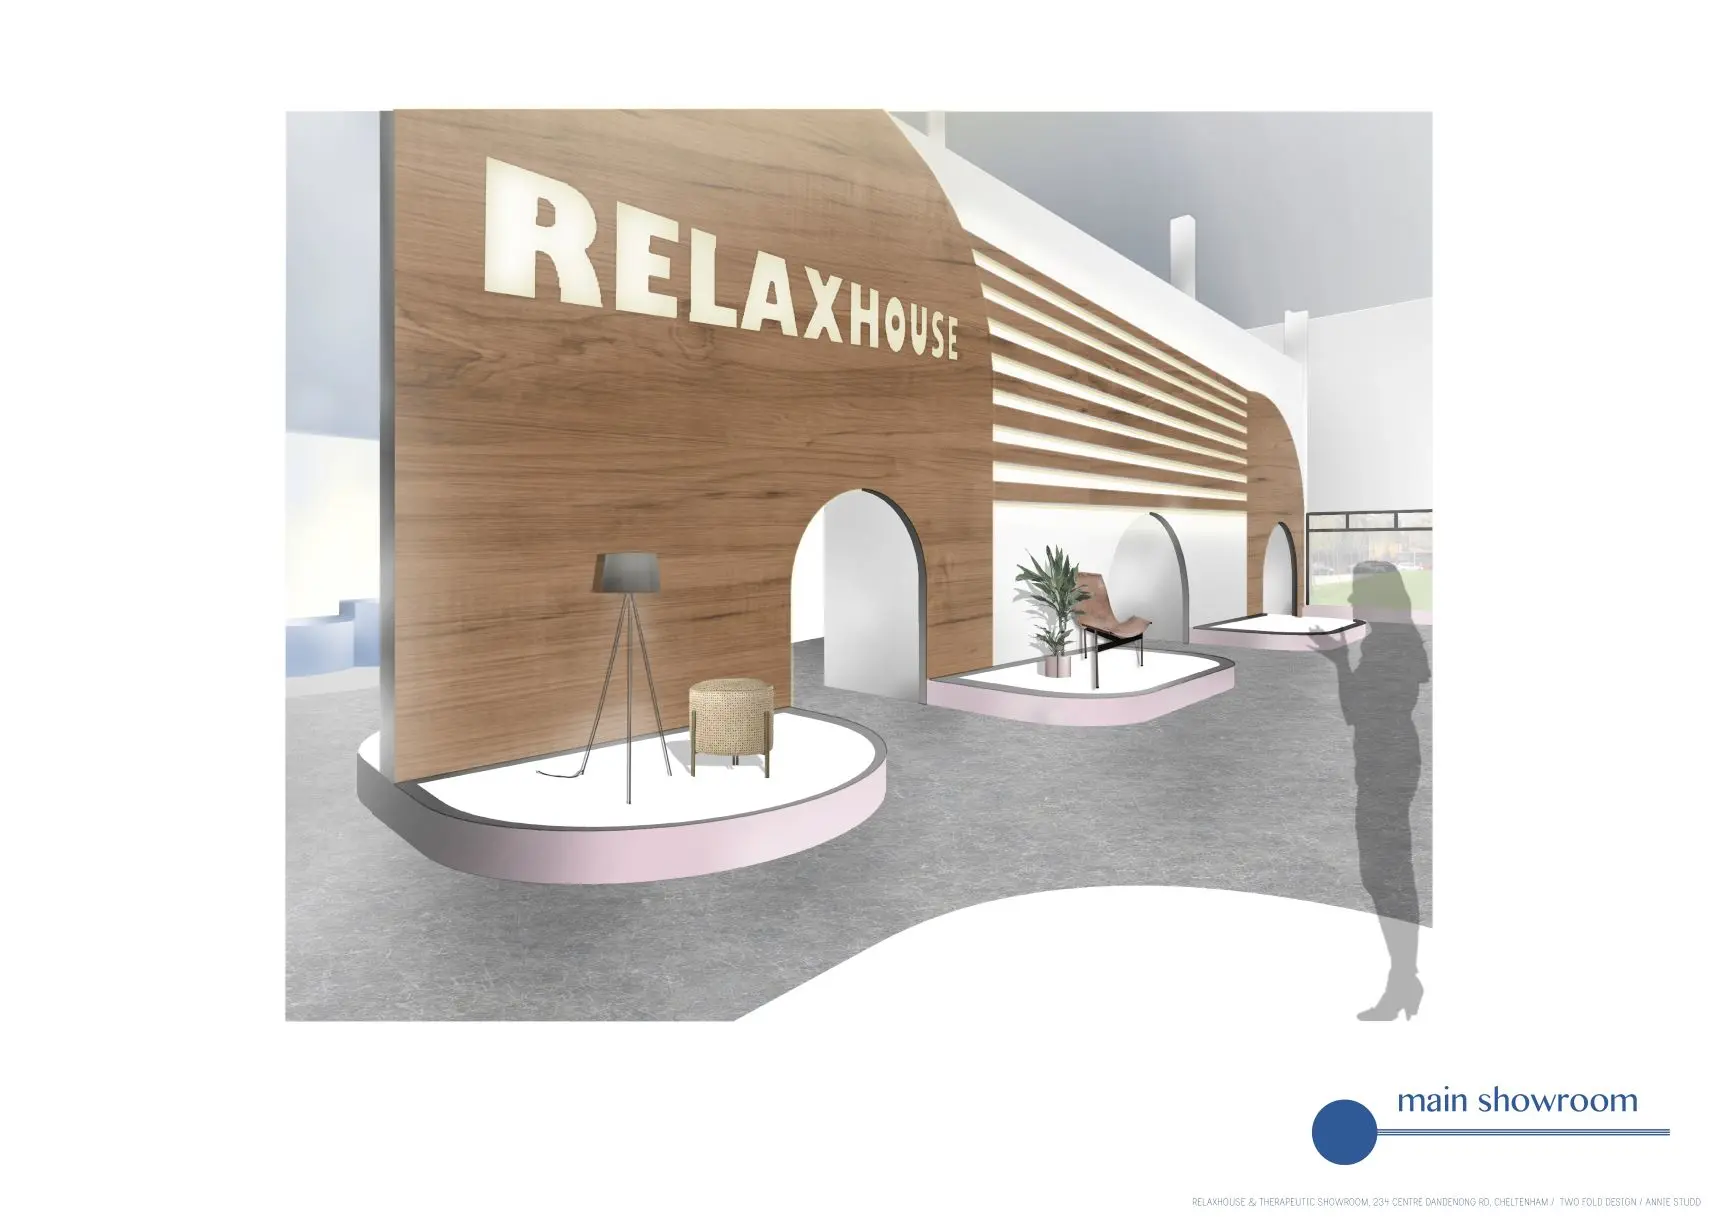 Illustration of furniture showroom with timber installation.